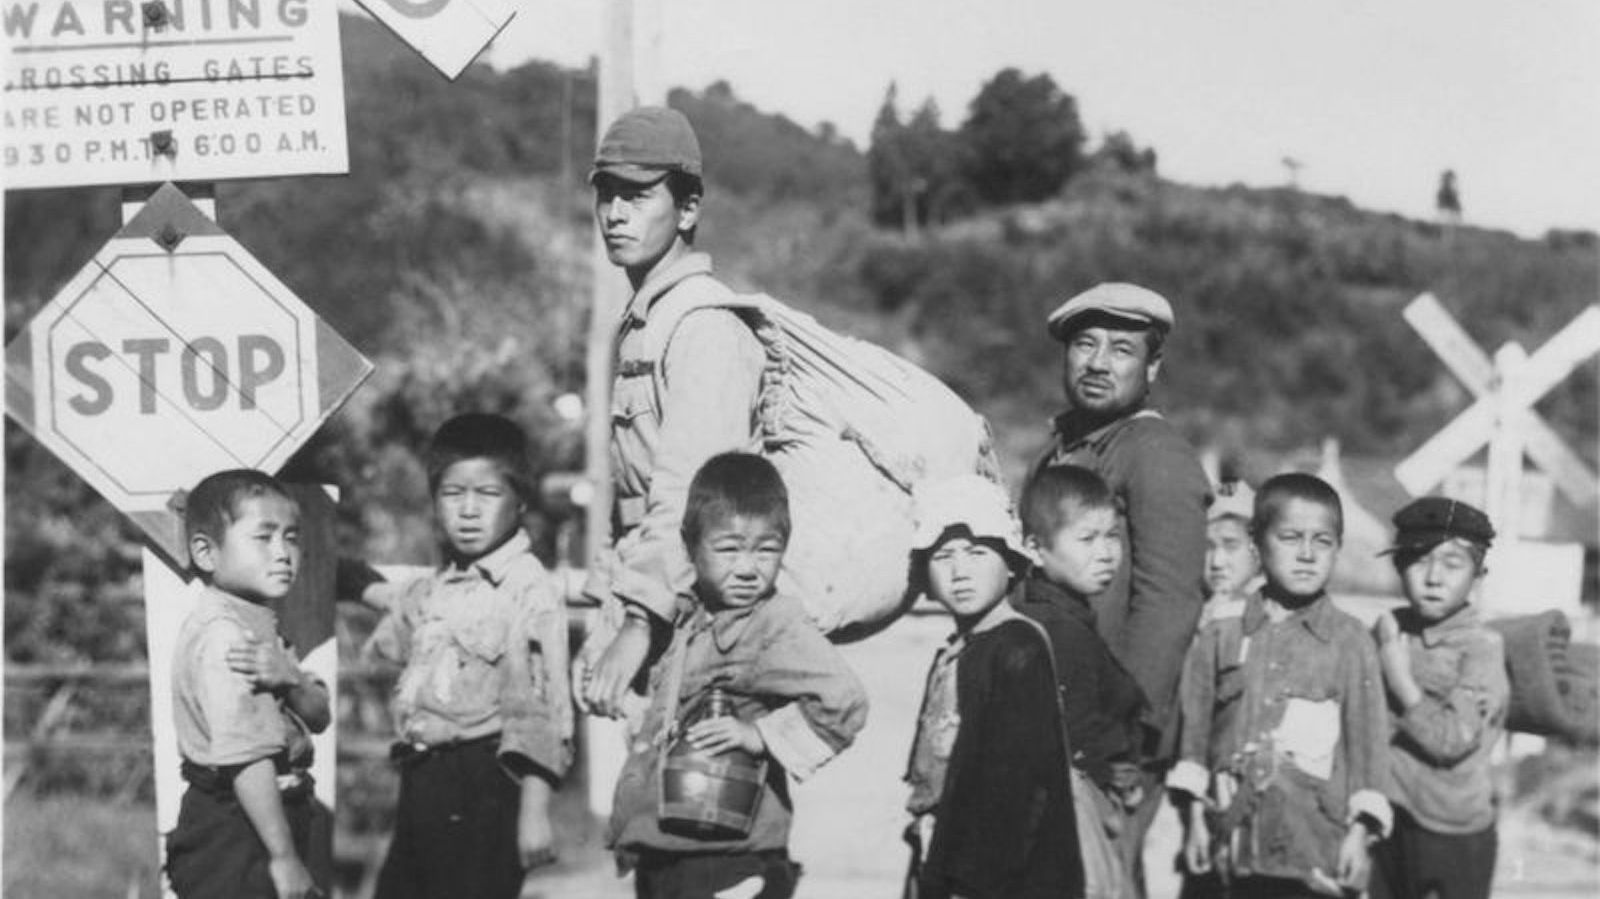 A black and white image of a group of Japanese children and two adults standing in front of a STOP sign at the side of the road looking at the camera forlornly